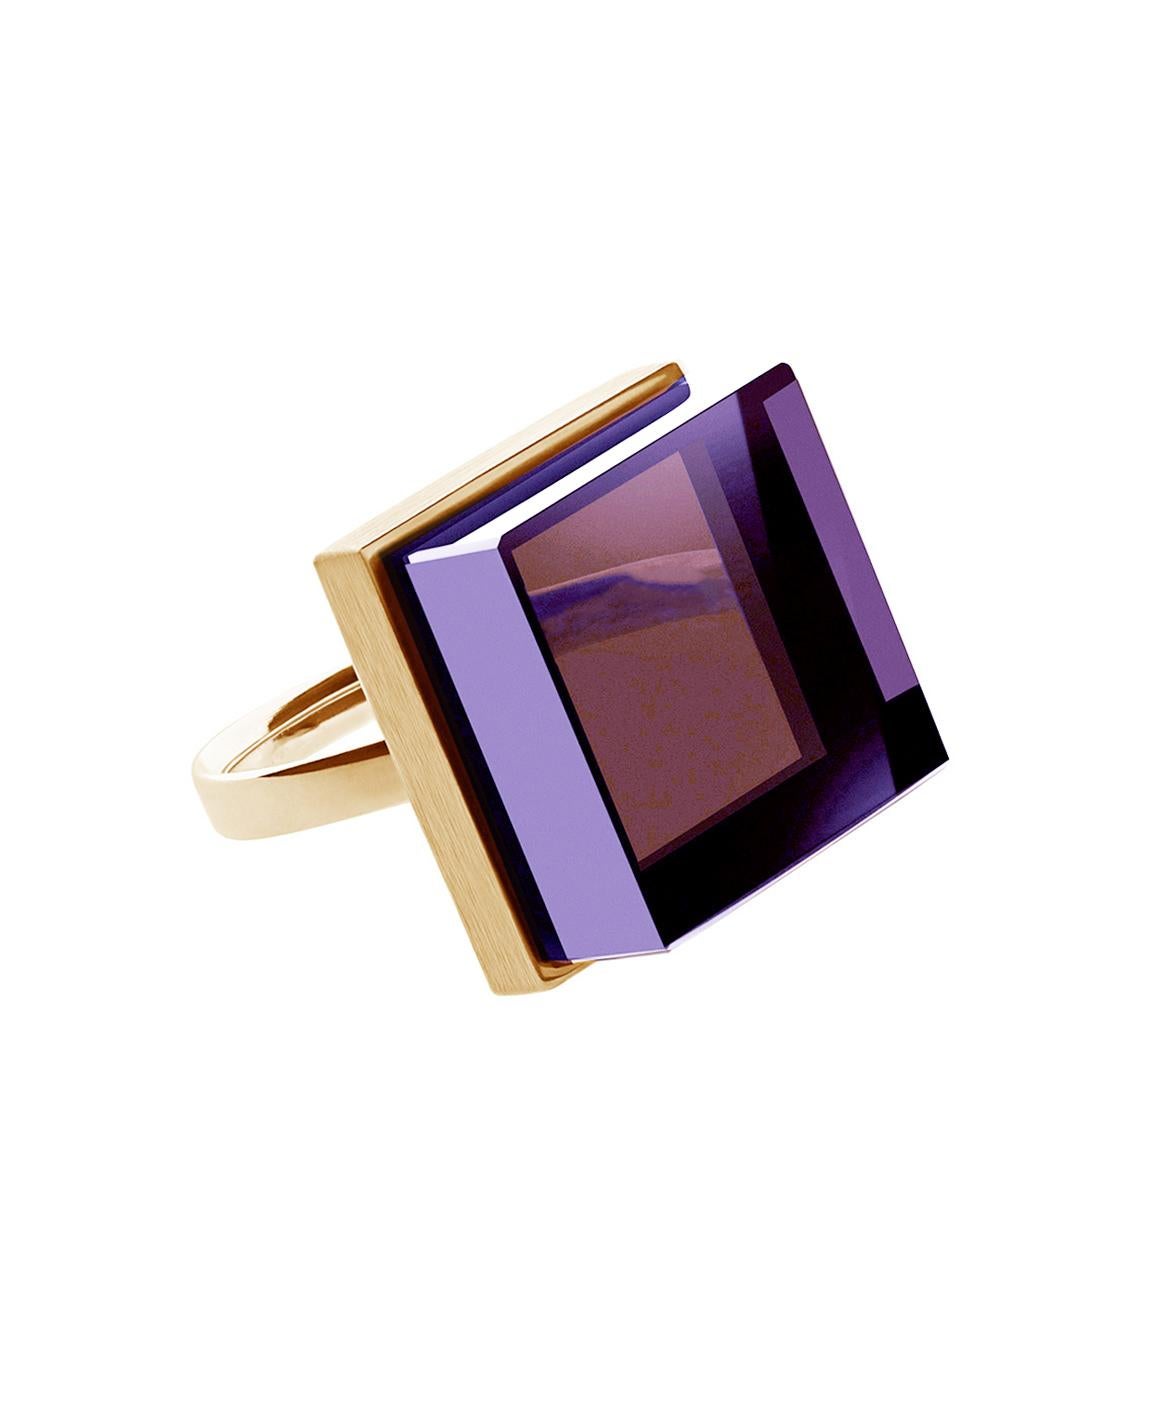 This ring is in 18 karat rose gold with 15x15x8 mm grown amethyst. It was published in Harper's Bazaar and Vogue UA. The piece can be ordered in the other colours, such as green amethyst, rose quartz, blue or green grown quartz, tear-transparent